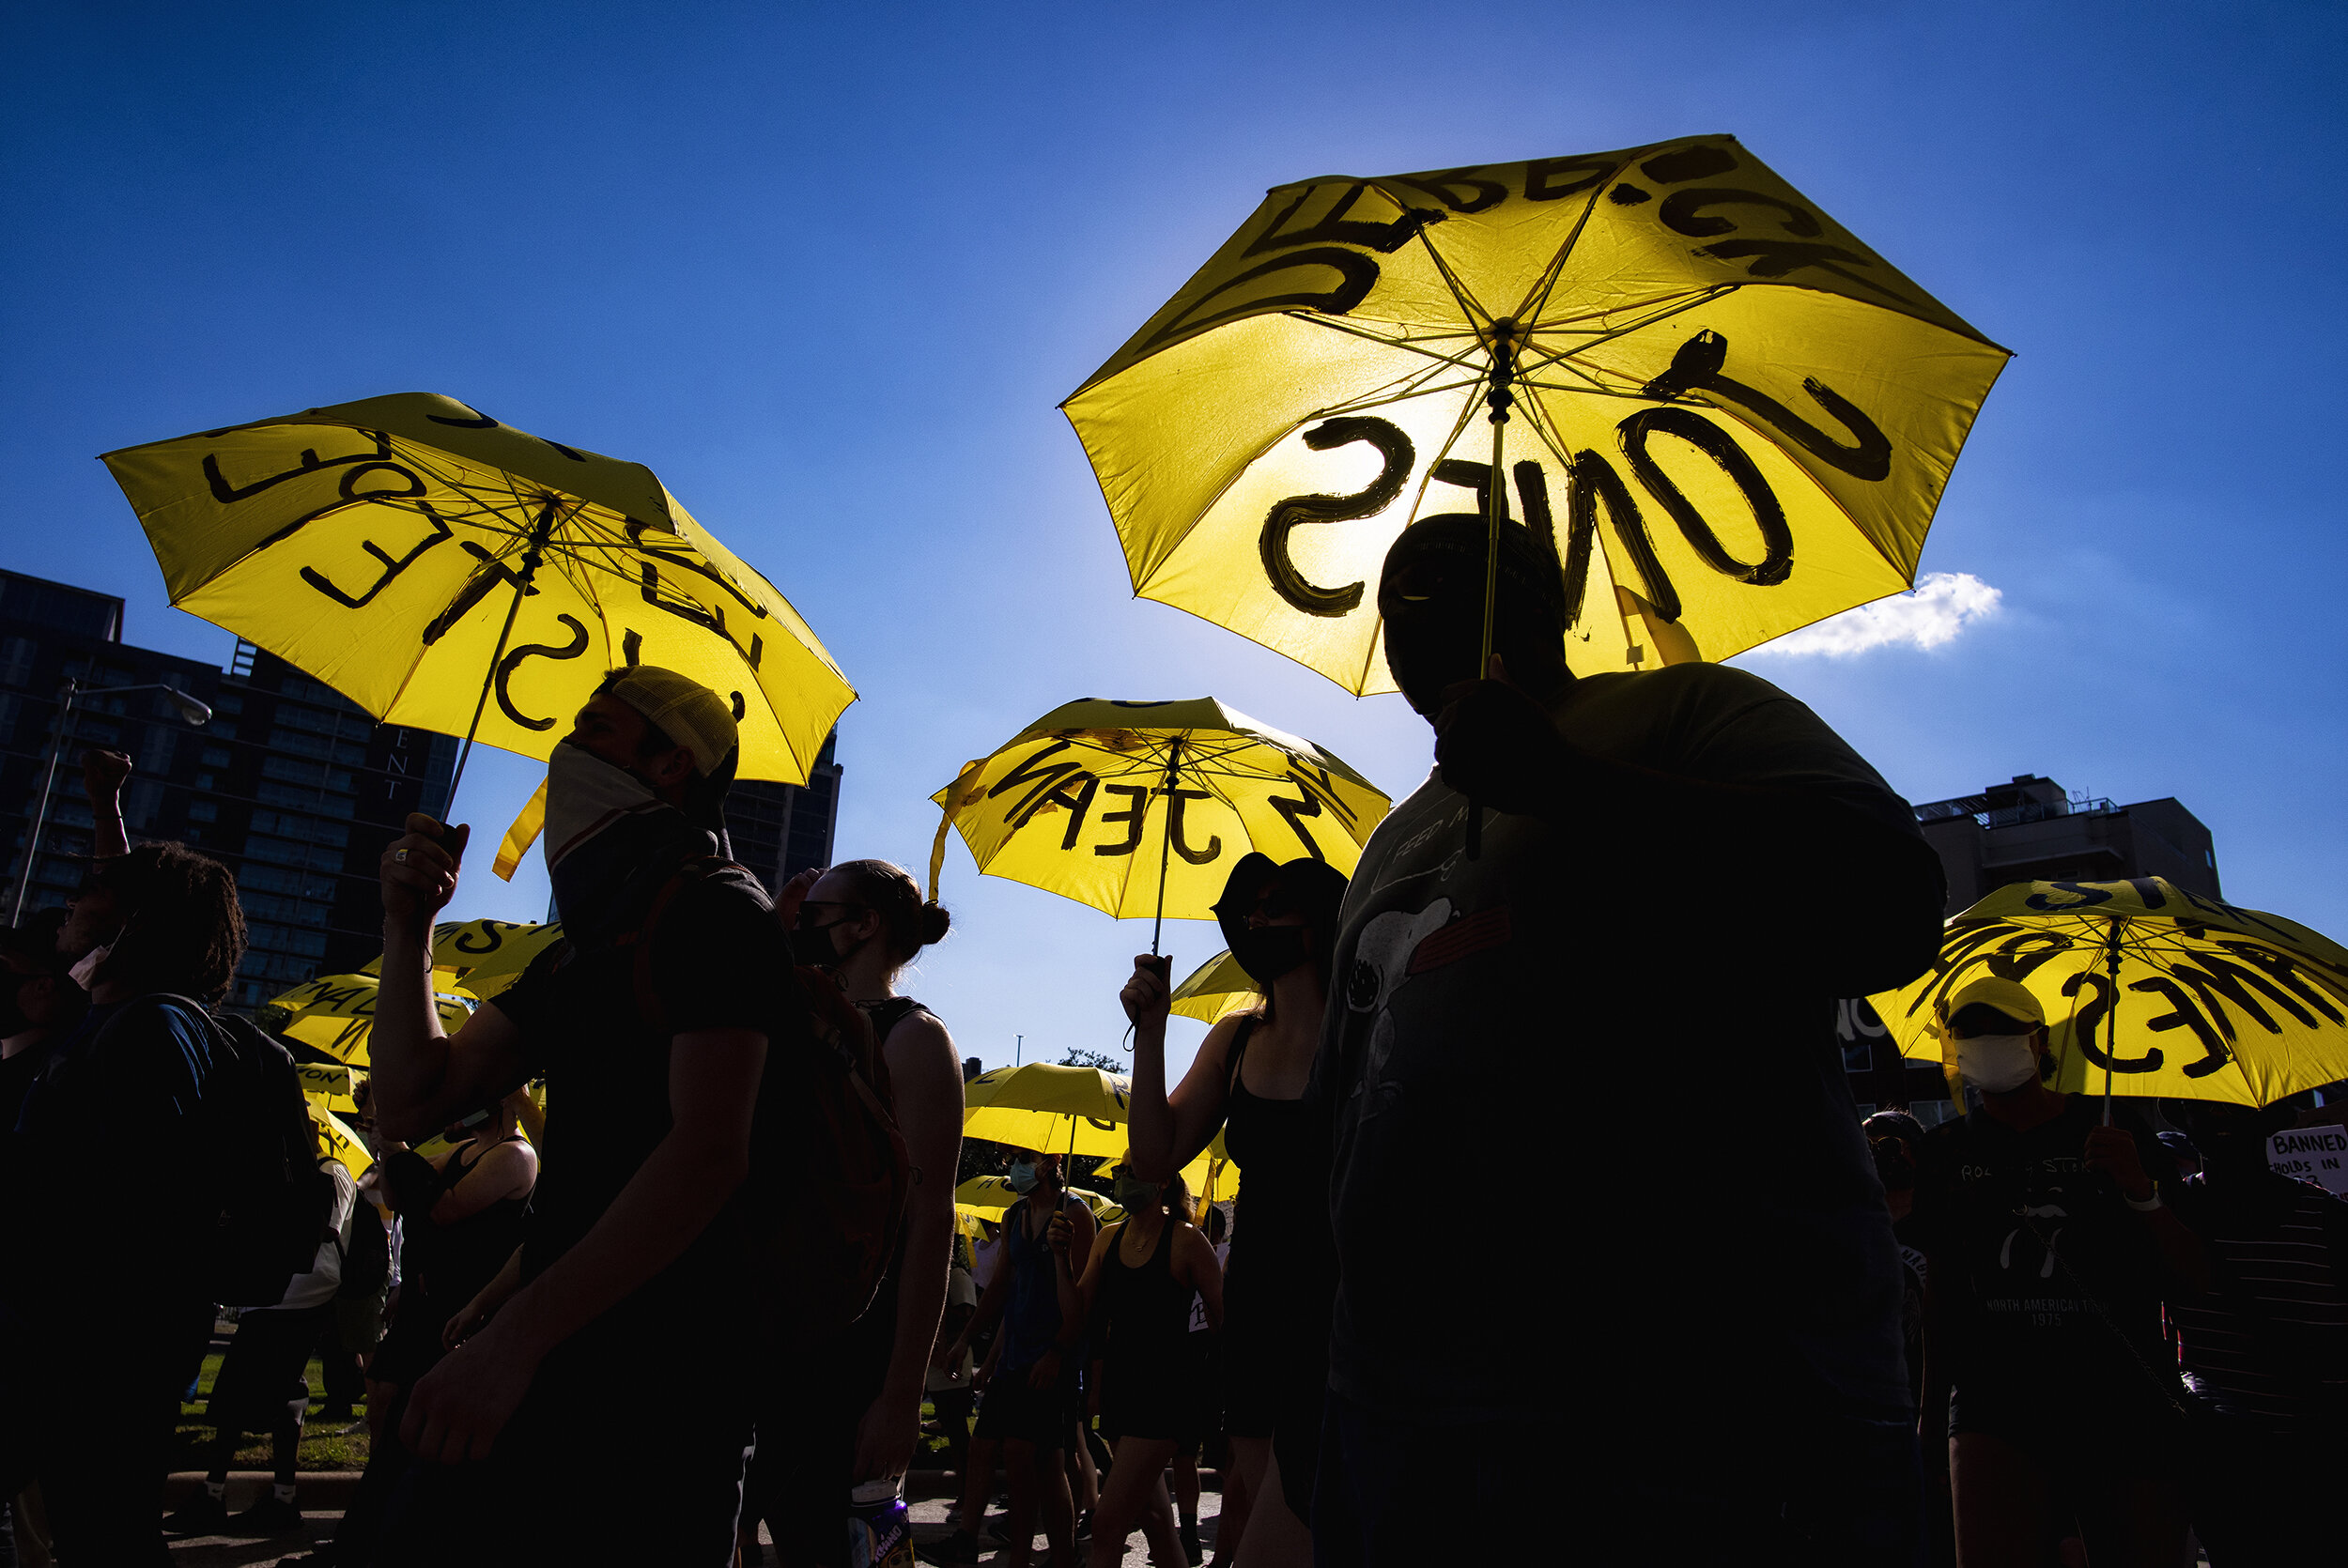  Protesters march down Harry Hines Boulevard from Pike Park in the Stop Police Crimes protest in Dallas, TX on June 13, 2020.  In a show of solidarity nodding to 2014’s Umbrella Movement in Hong Kong, Dallas artists painted yellow umbrellas with the 